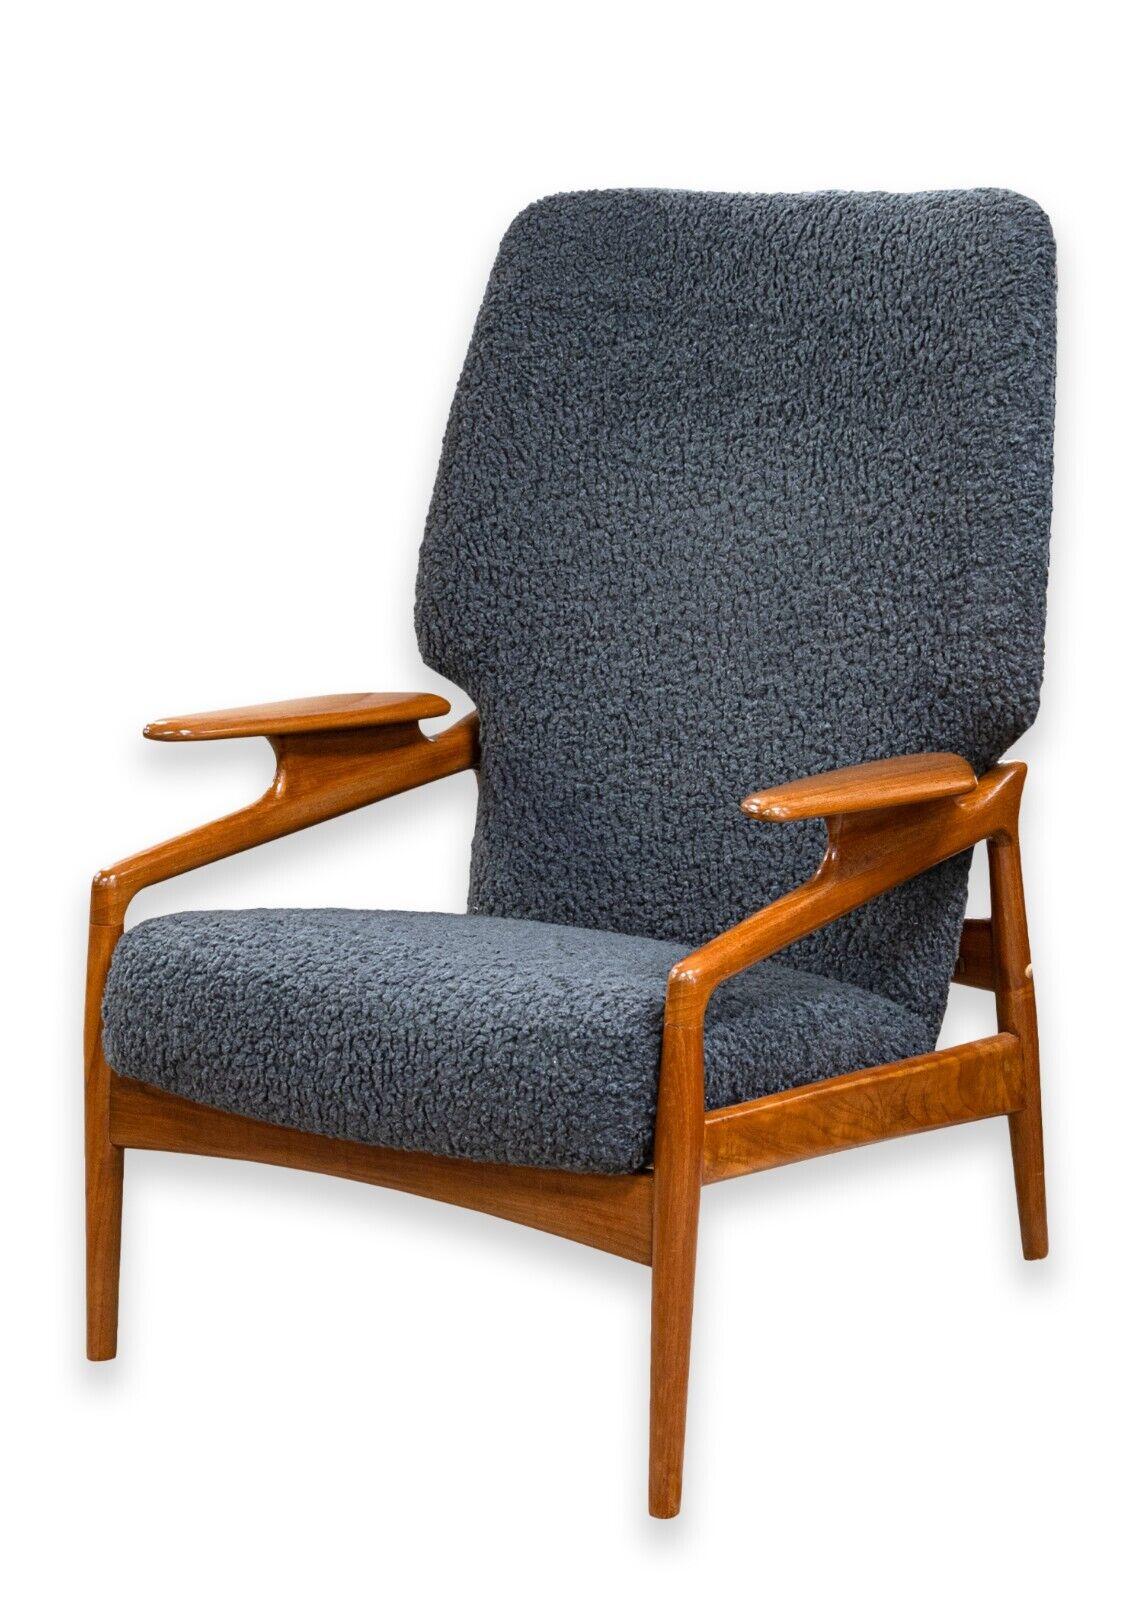 A John Bone for Mikael Laursen lounge chair. A beautiful piece of functional art from the 1950s. This lounge chair features a gorgeous sculpted teak wood frame designed by John Bone, and cozy wool cushions with a deep blue slate coloring. This chair